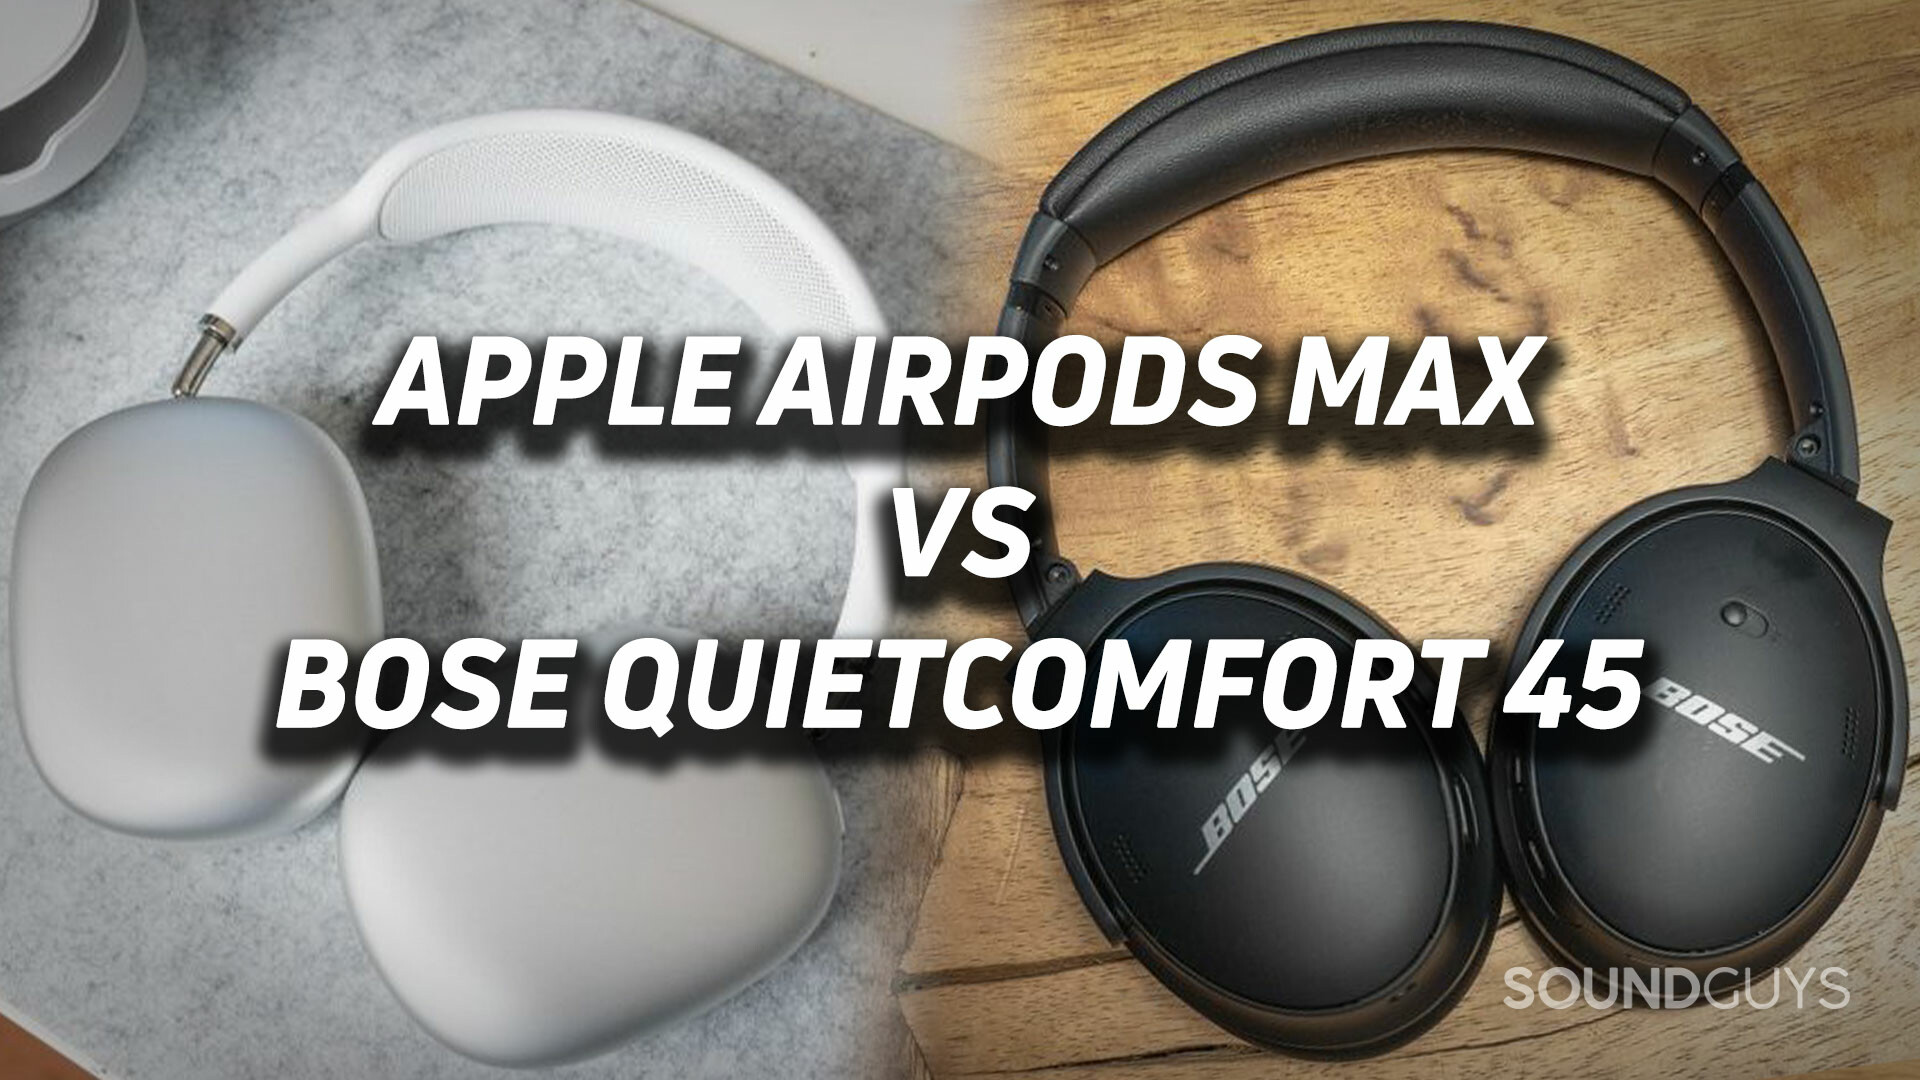 On the left side is the Apple AirPods Max and on the right is the Bose QuietComfort 45. Text overlaid reads, "Apple AirPods Max VS Bose QuietComfort 45".